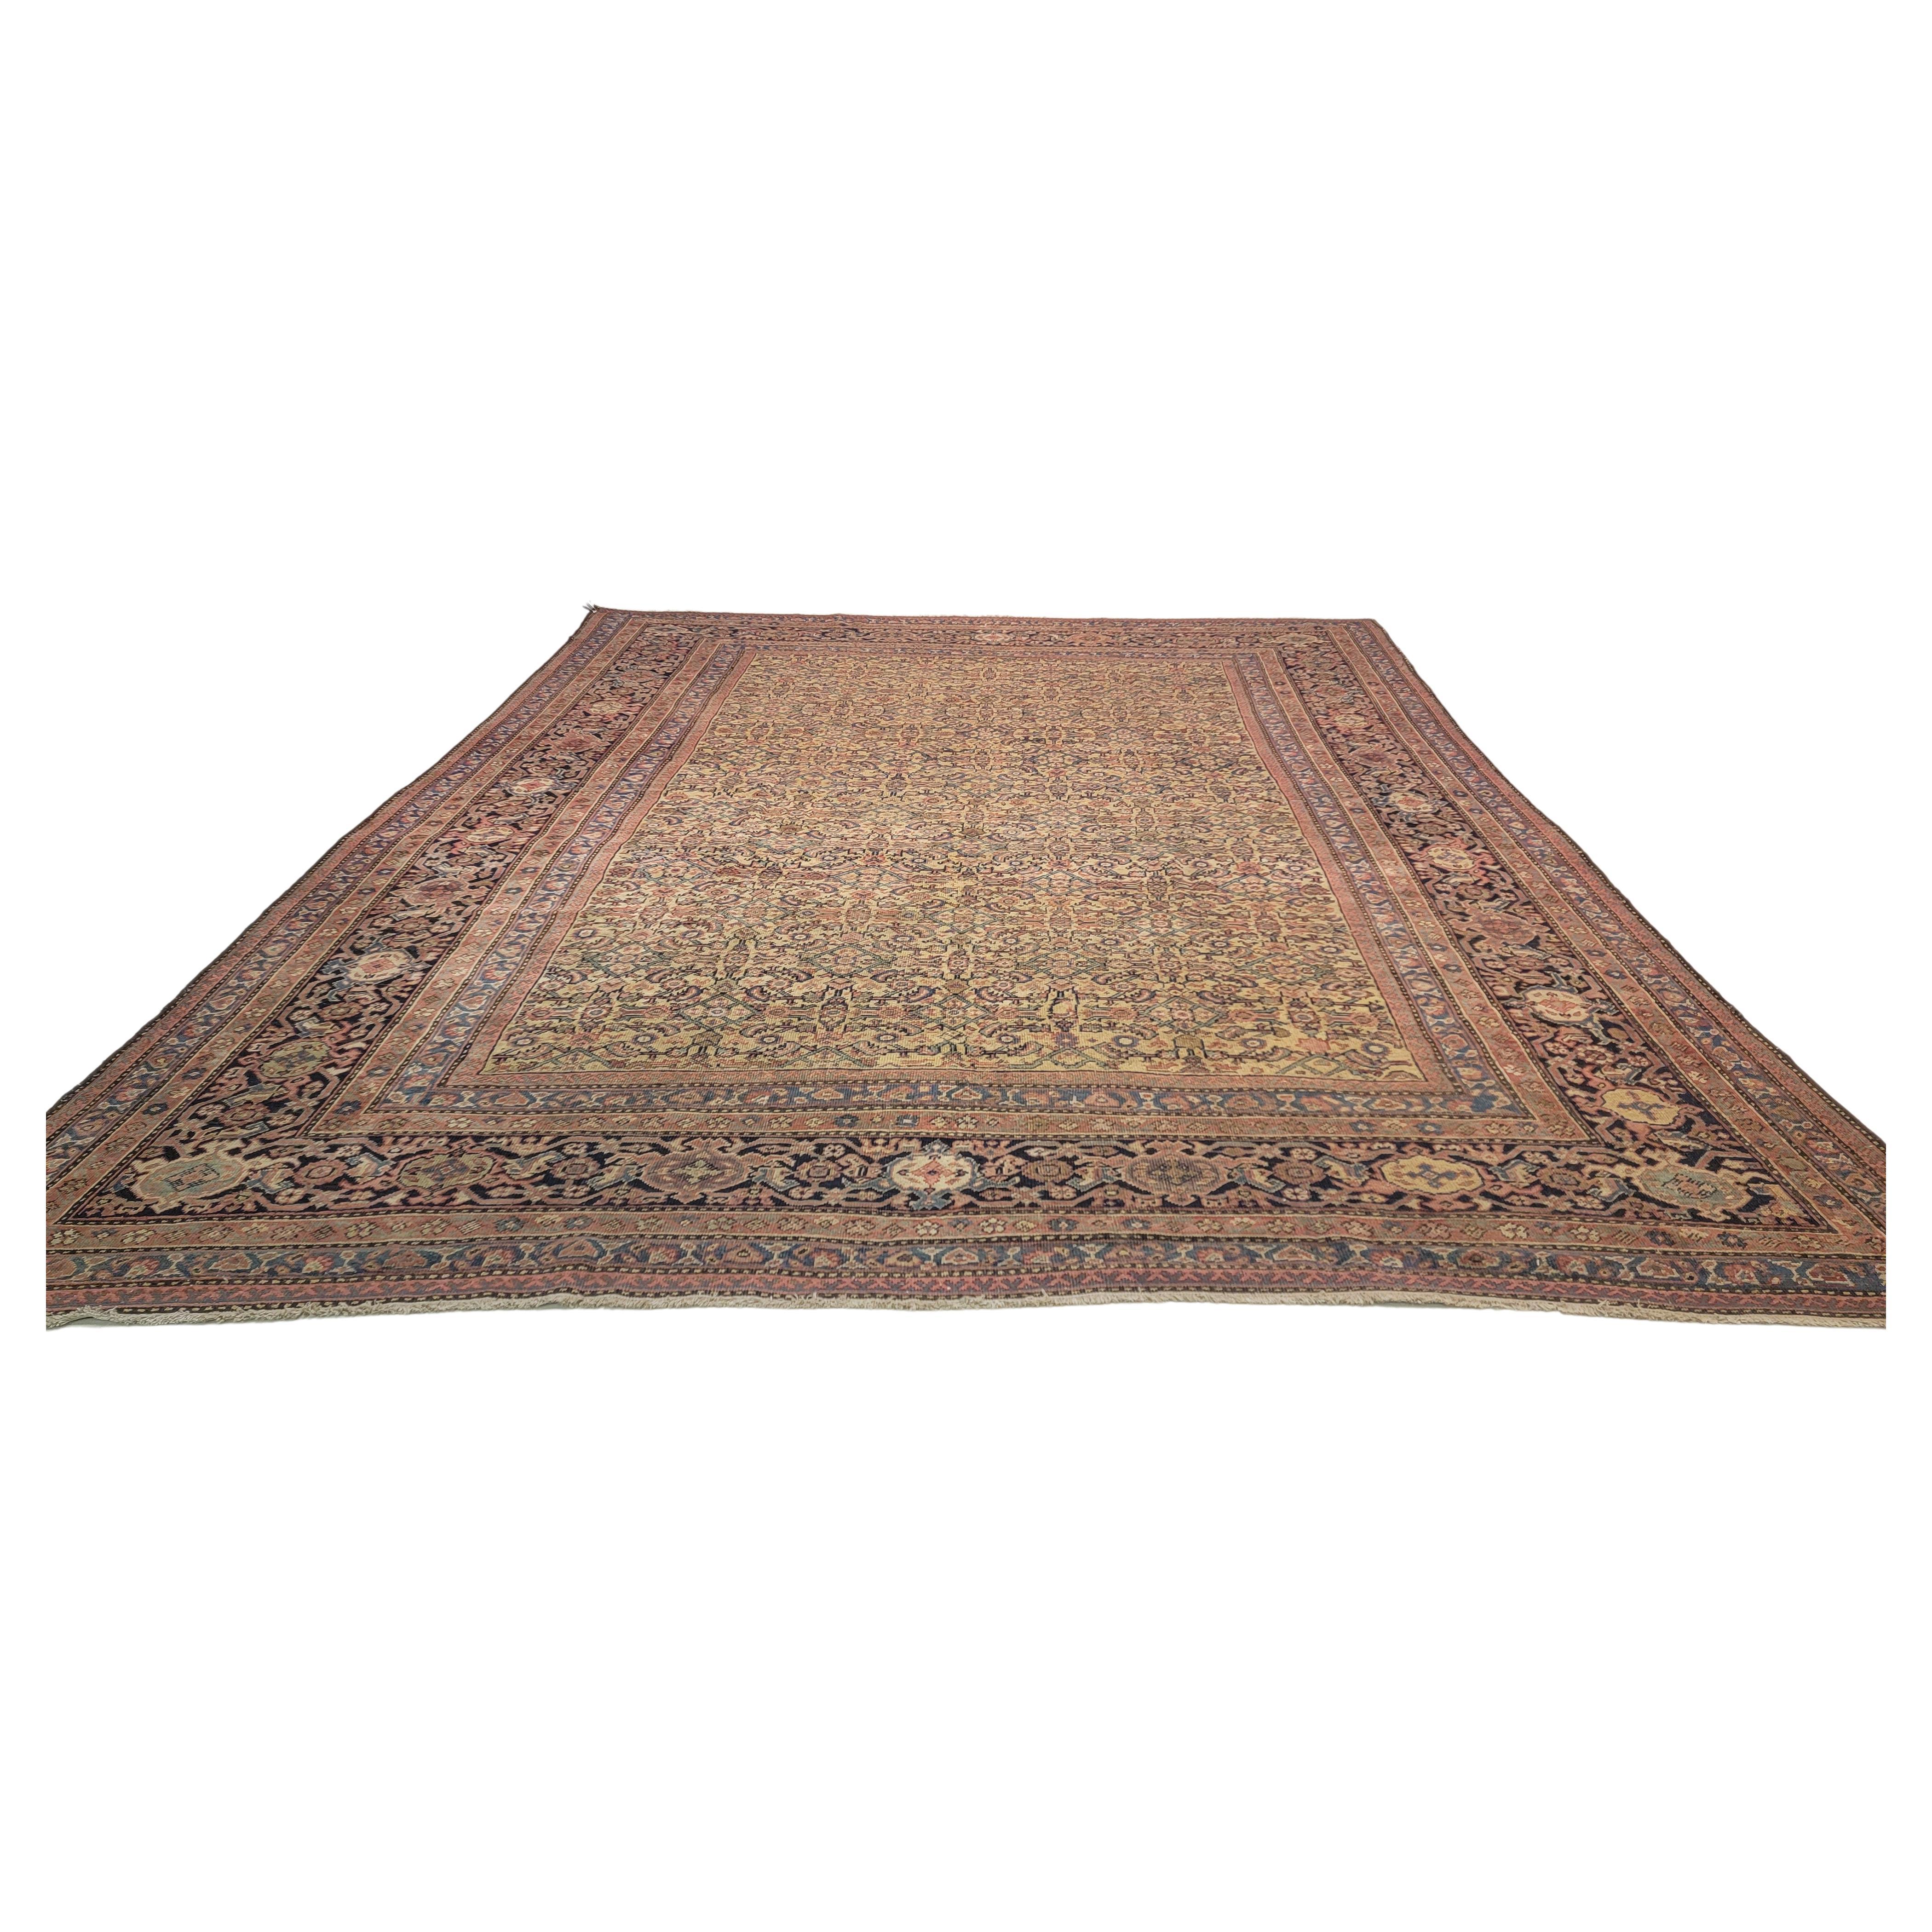 Late 19th Century Antique Persian Sultanabad/Meshkabad Rug